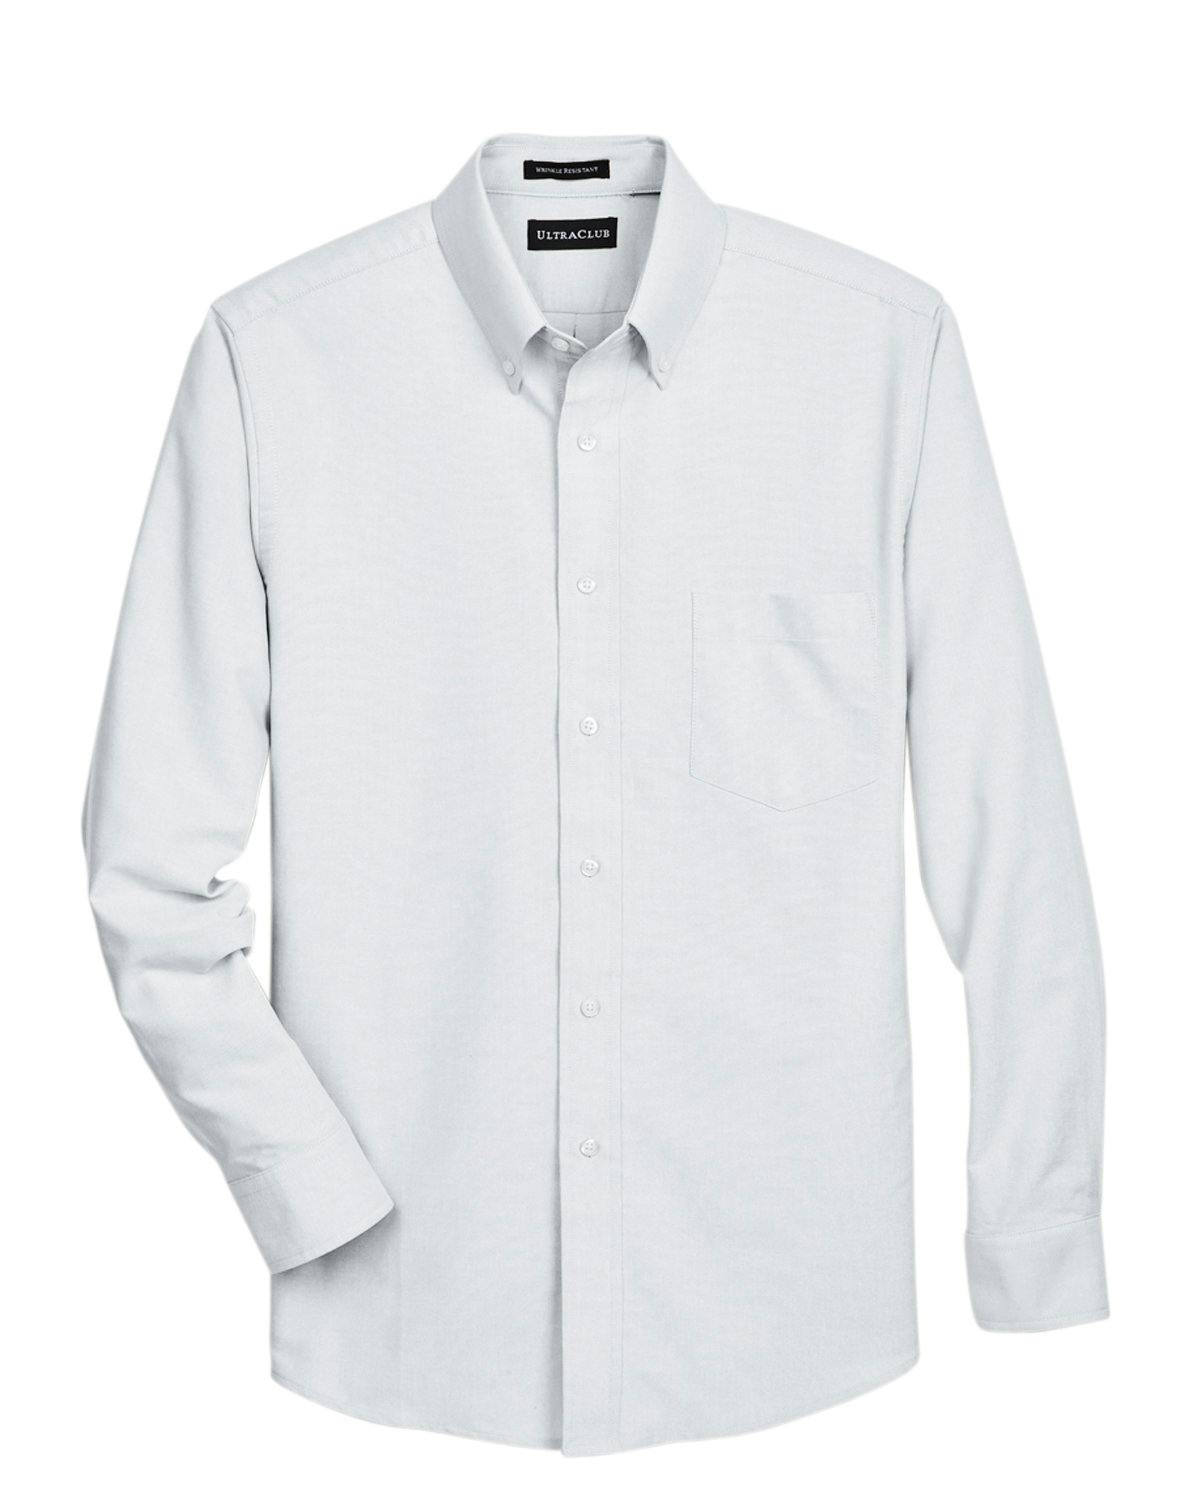 Image for Men's Classic Wrinkle-Resistant Long-Sleeve Oxford